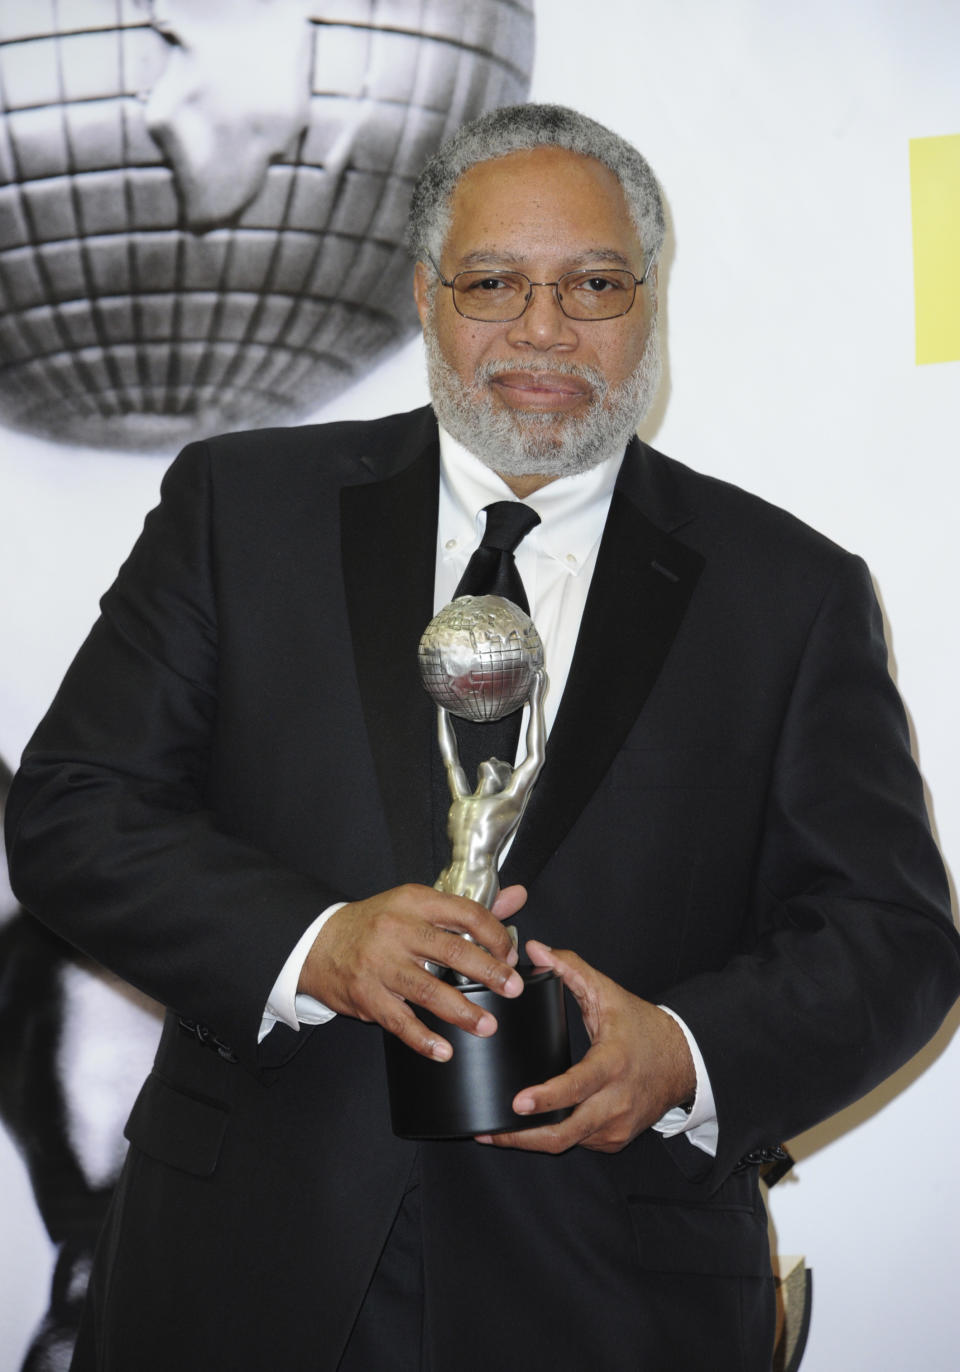 Dr. Lonnie G. Bunch III poses with the president's award in the press room at the 48th annual NAACP Image Awards at the Pasadena Civic Auditorium on Saturday, Feb. 11, 2017, in Pasadena, Calif. (Photo by Richard Shotwell/Invision/AP)